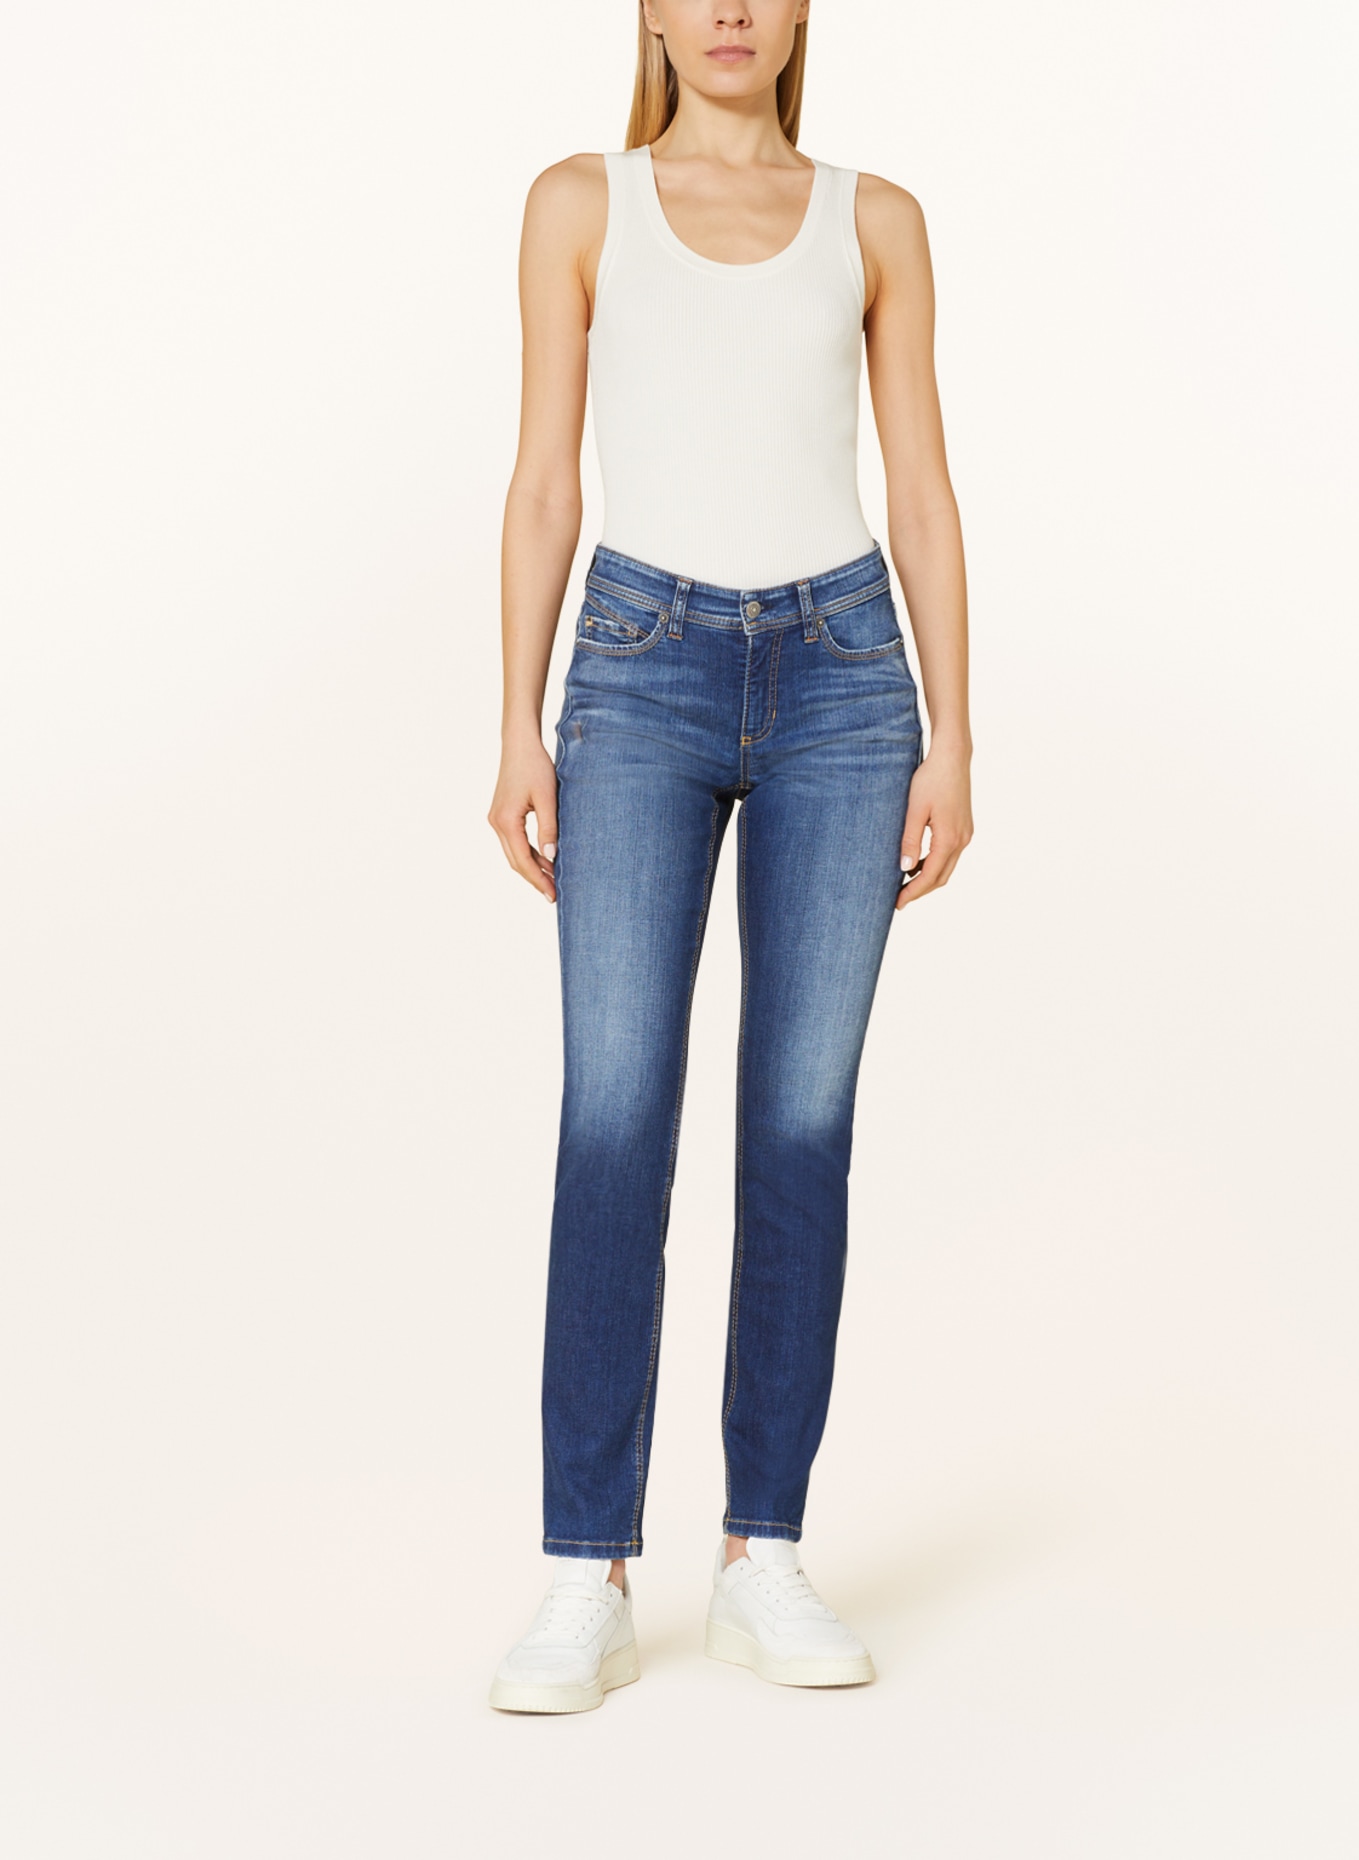 CAMBIO Skinny jeans PARLA with sequins, Color: 5061 medium contrast splinted (Image 2)